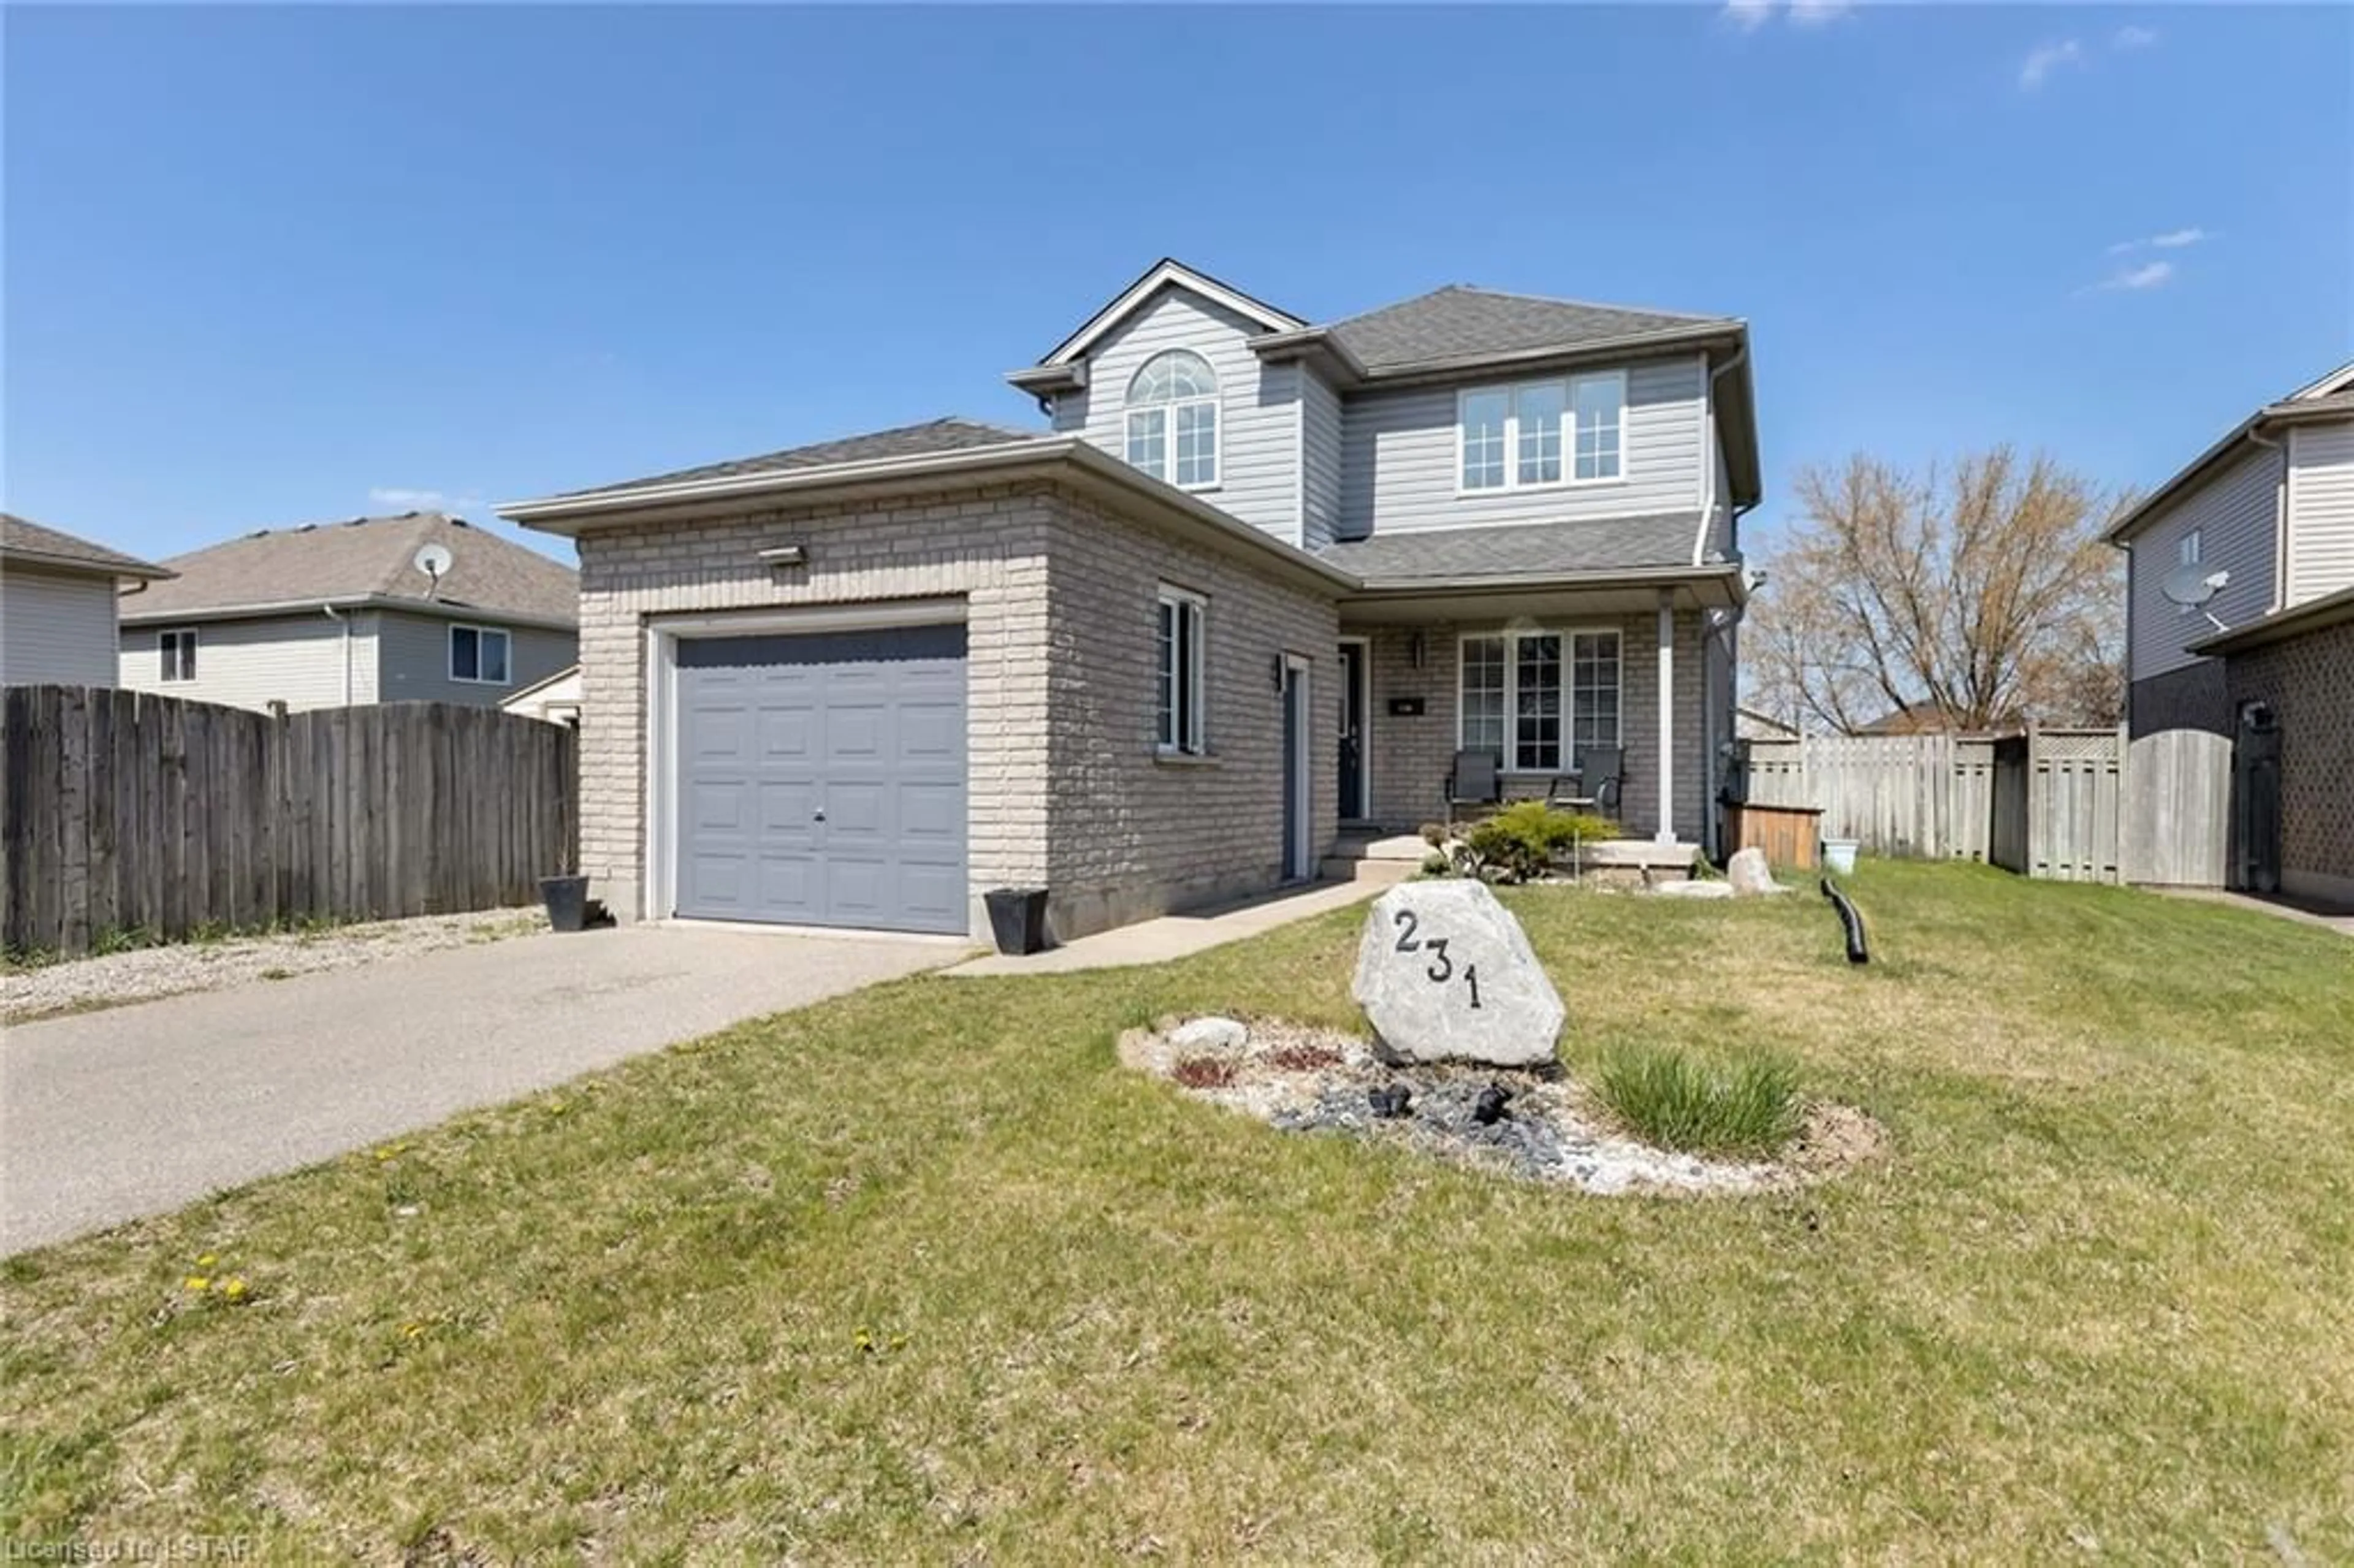 Frontside or backside of a home for 231 Parkview Dr, Strathroy Ontario N7G 4C1